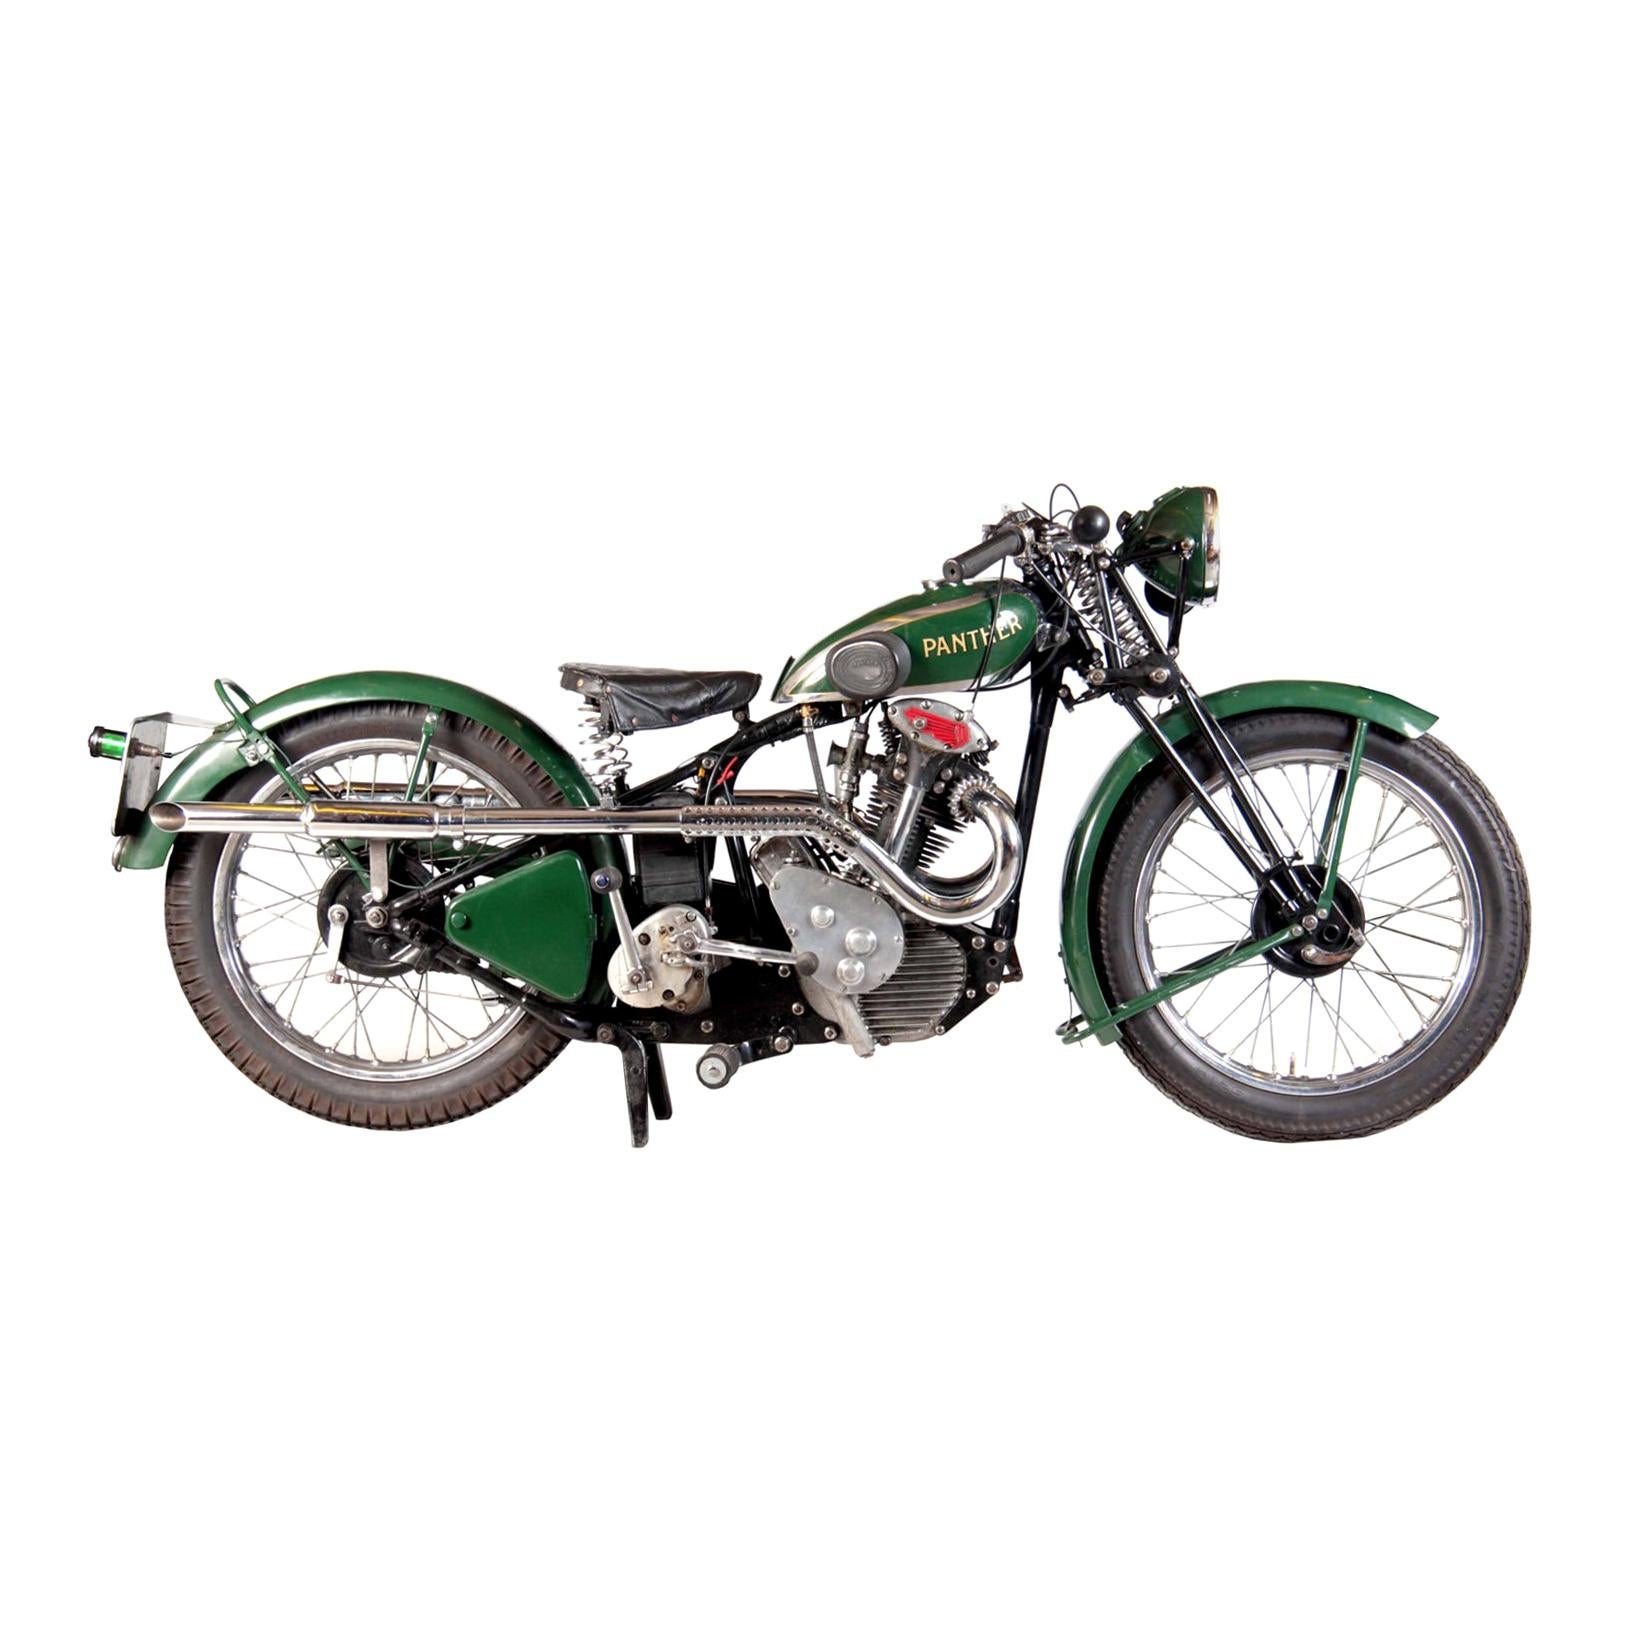 1932 Phelon and Moore Panther Motorcycle, Vintage 250cc Sloper Engine